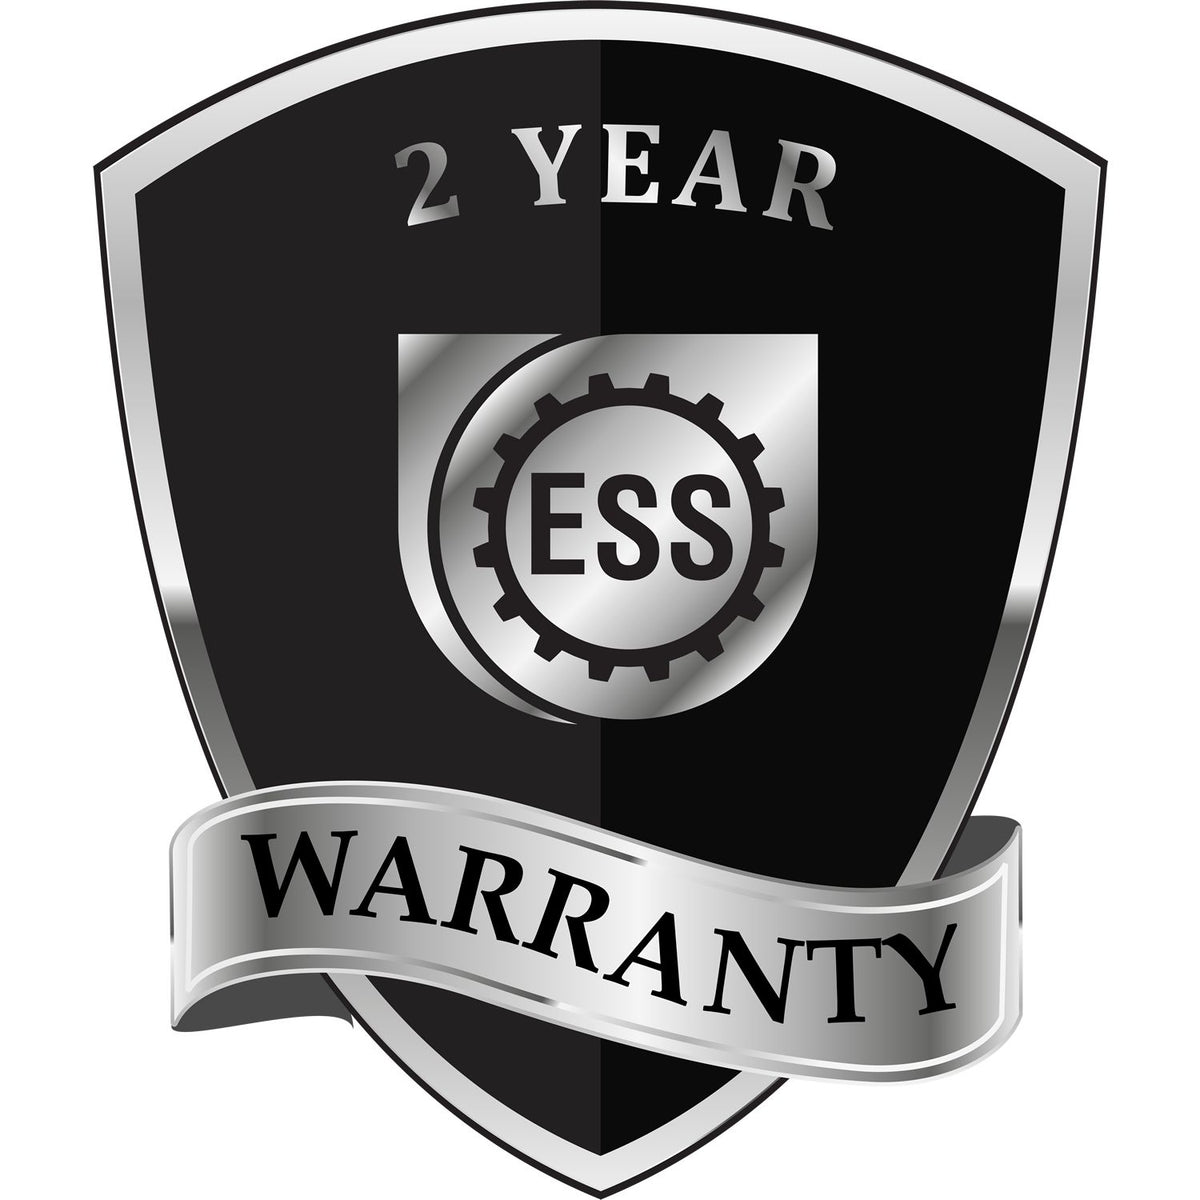 A black and silver badge or emblem showing warranty information for the Handheld Wyoming Professional Geologist Embosser